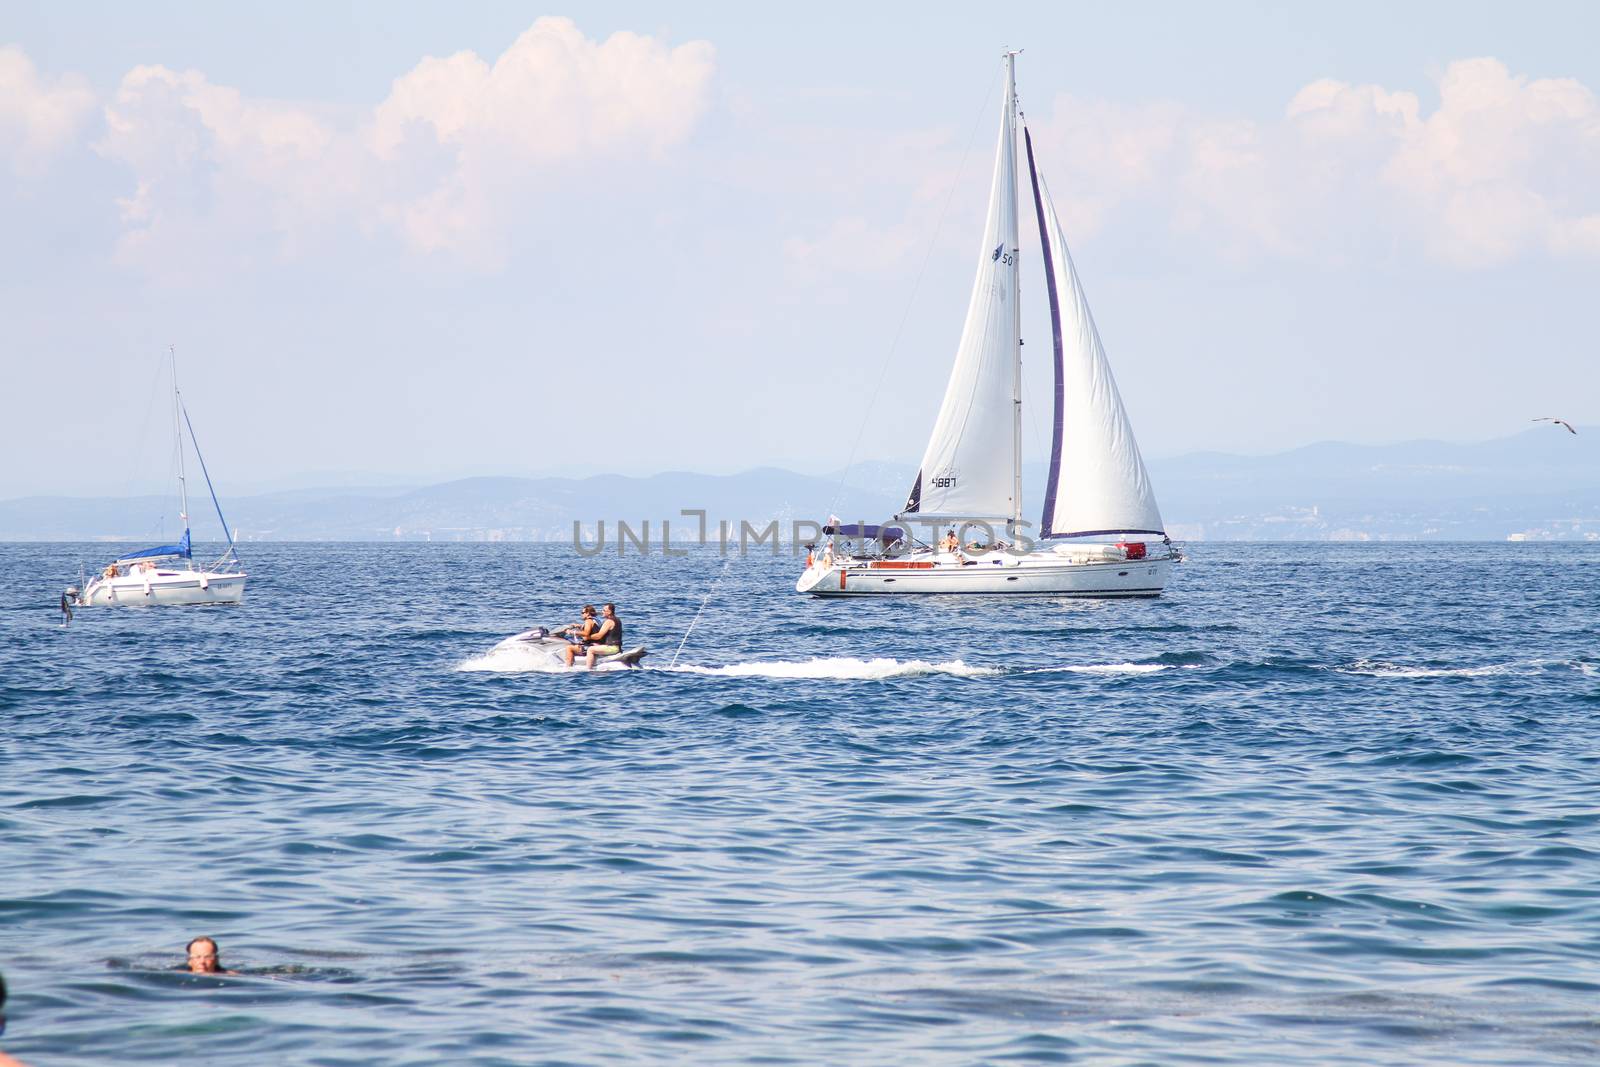 Yacht and people on water scuter by the coast.